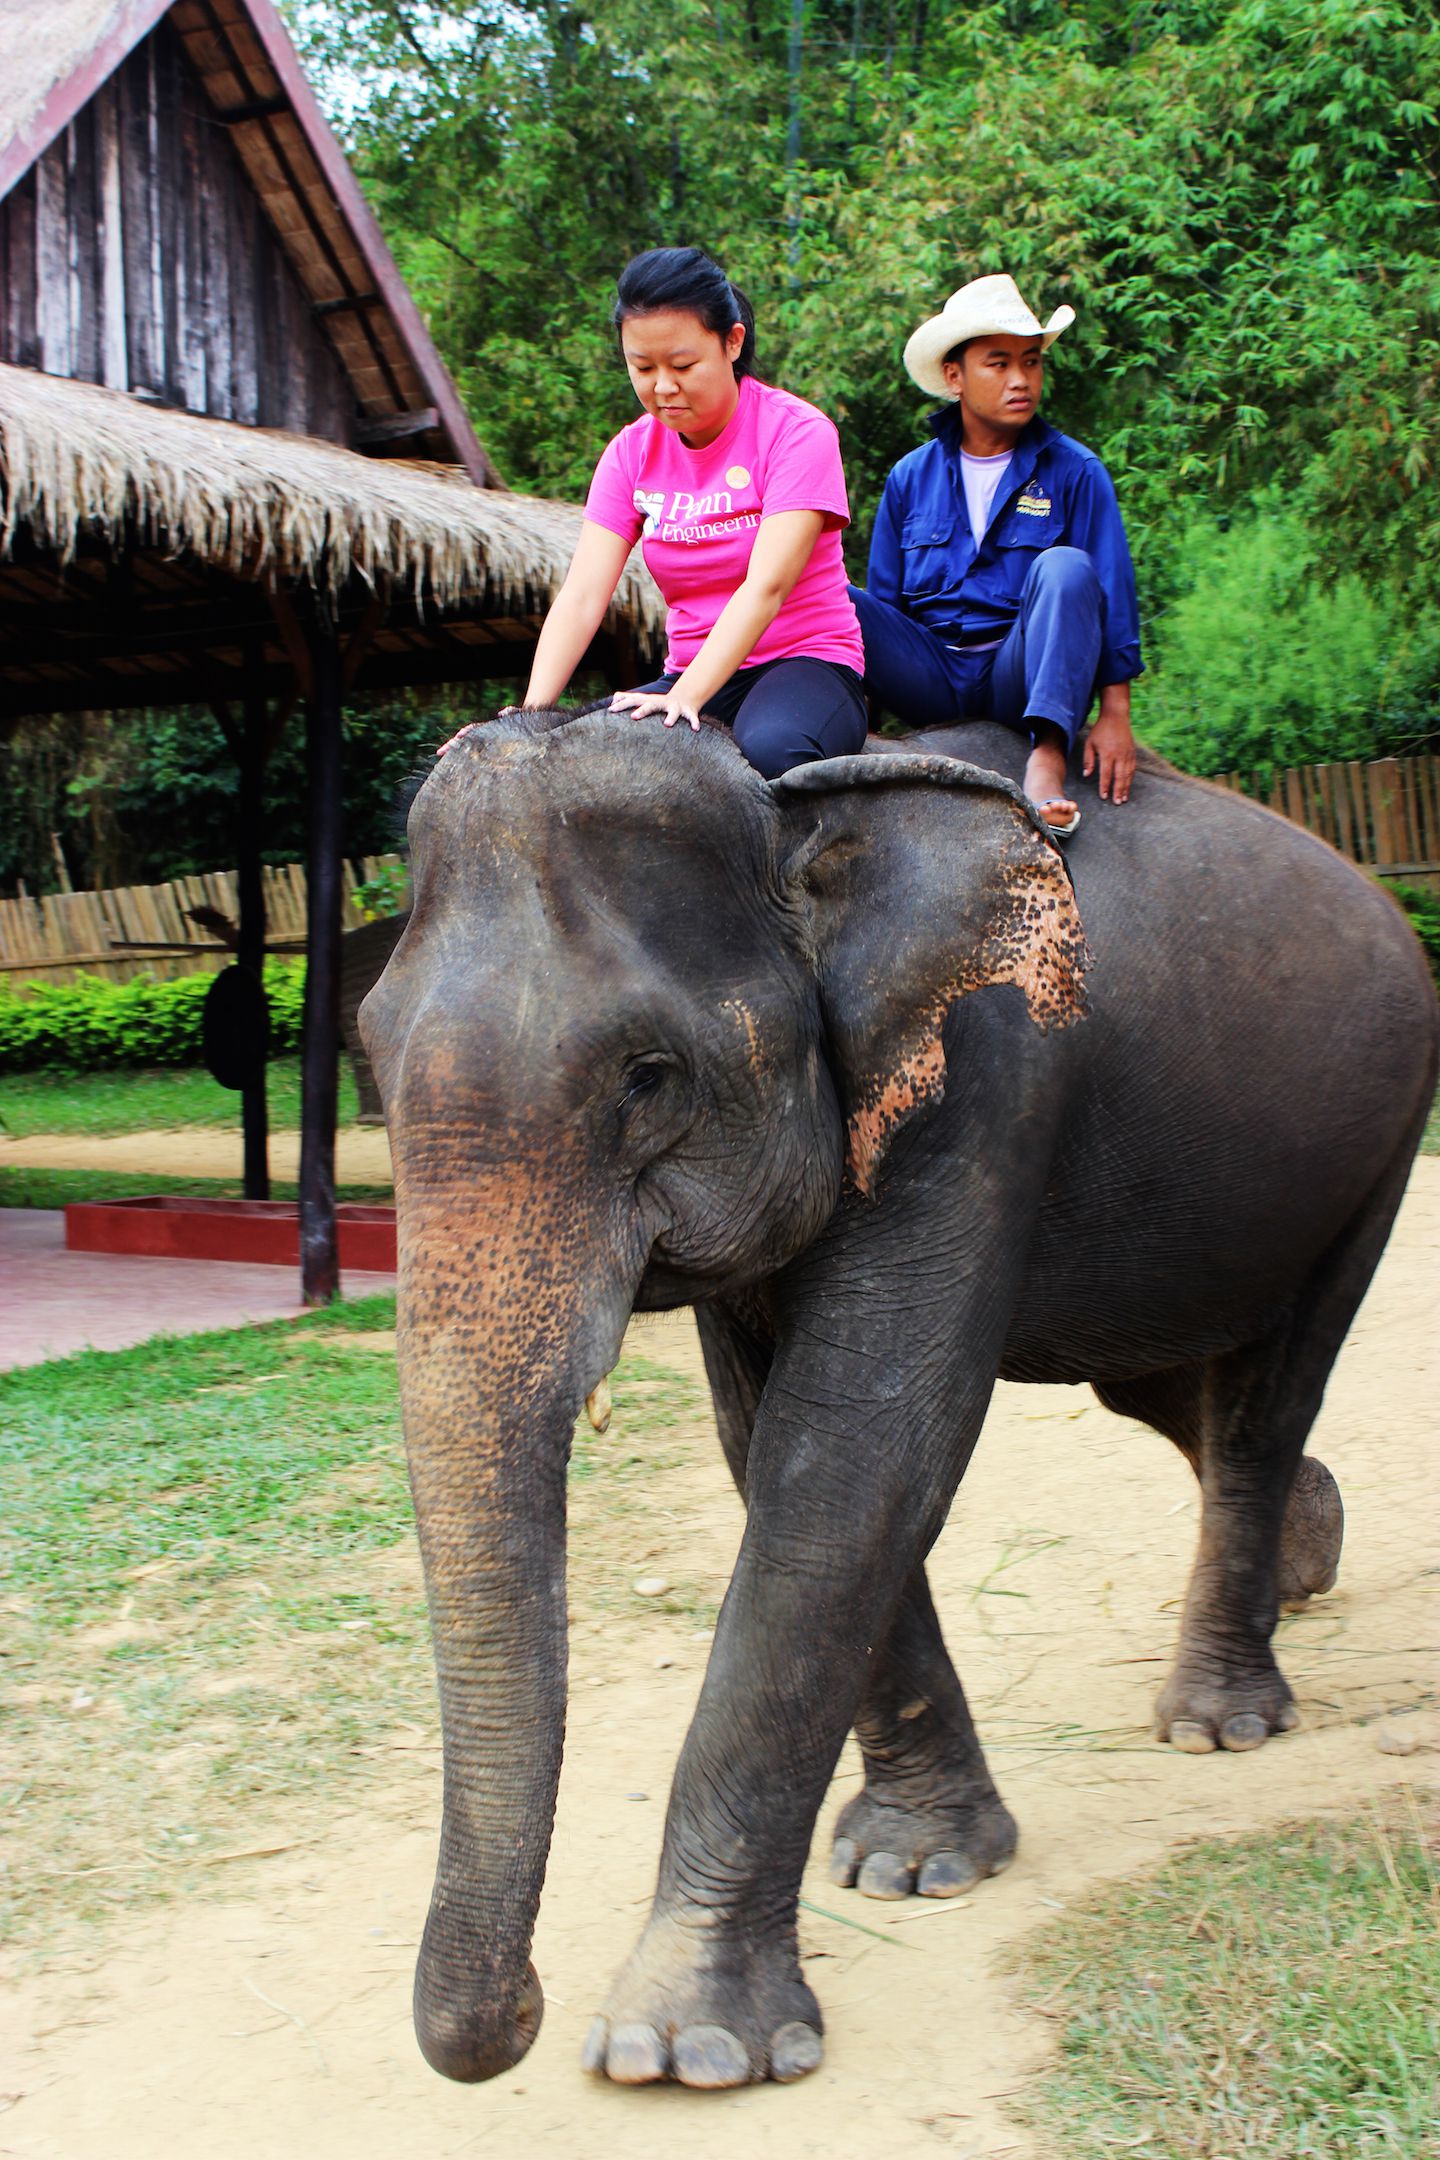 Julie learning how to ride the elephant at the Elephant Village, Luang Prabang, Laos